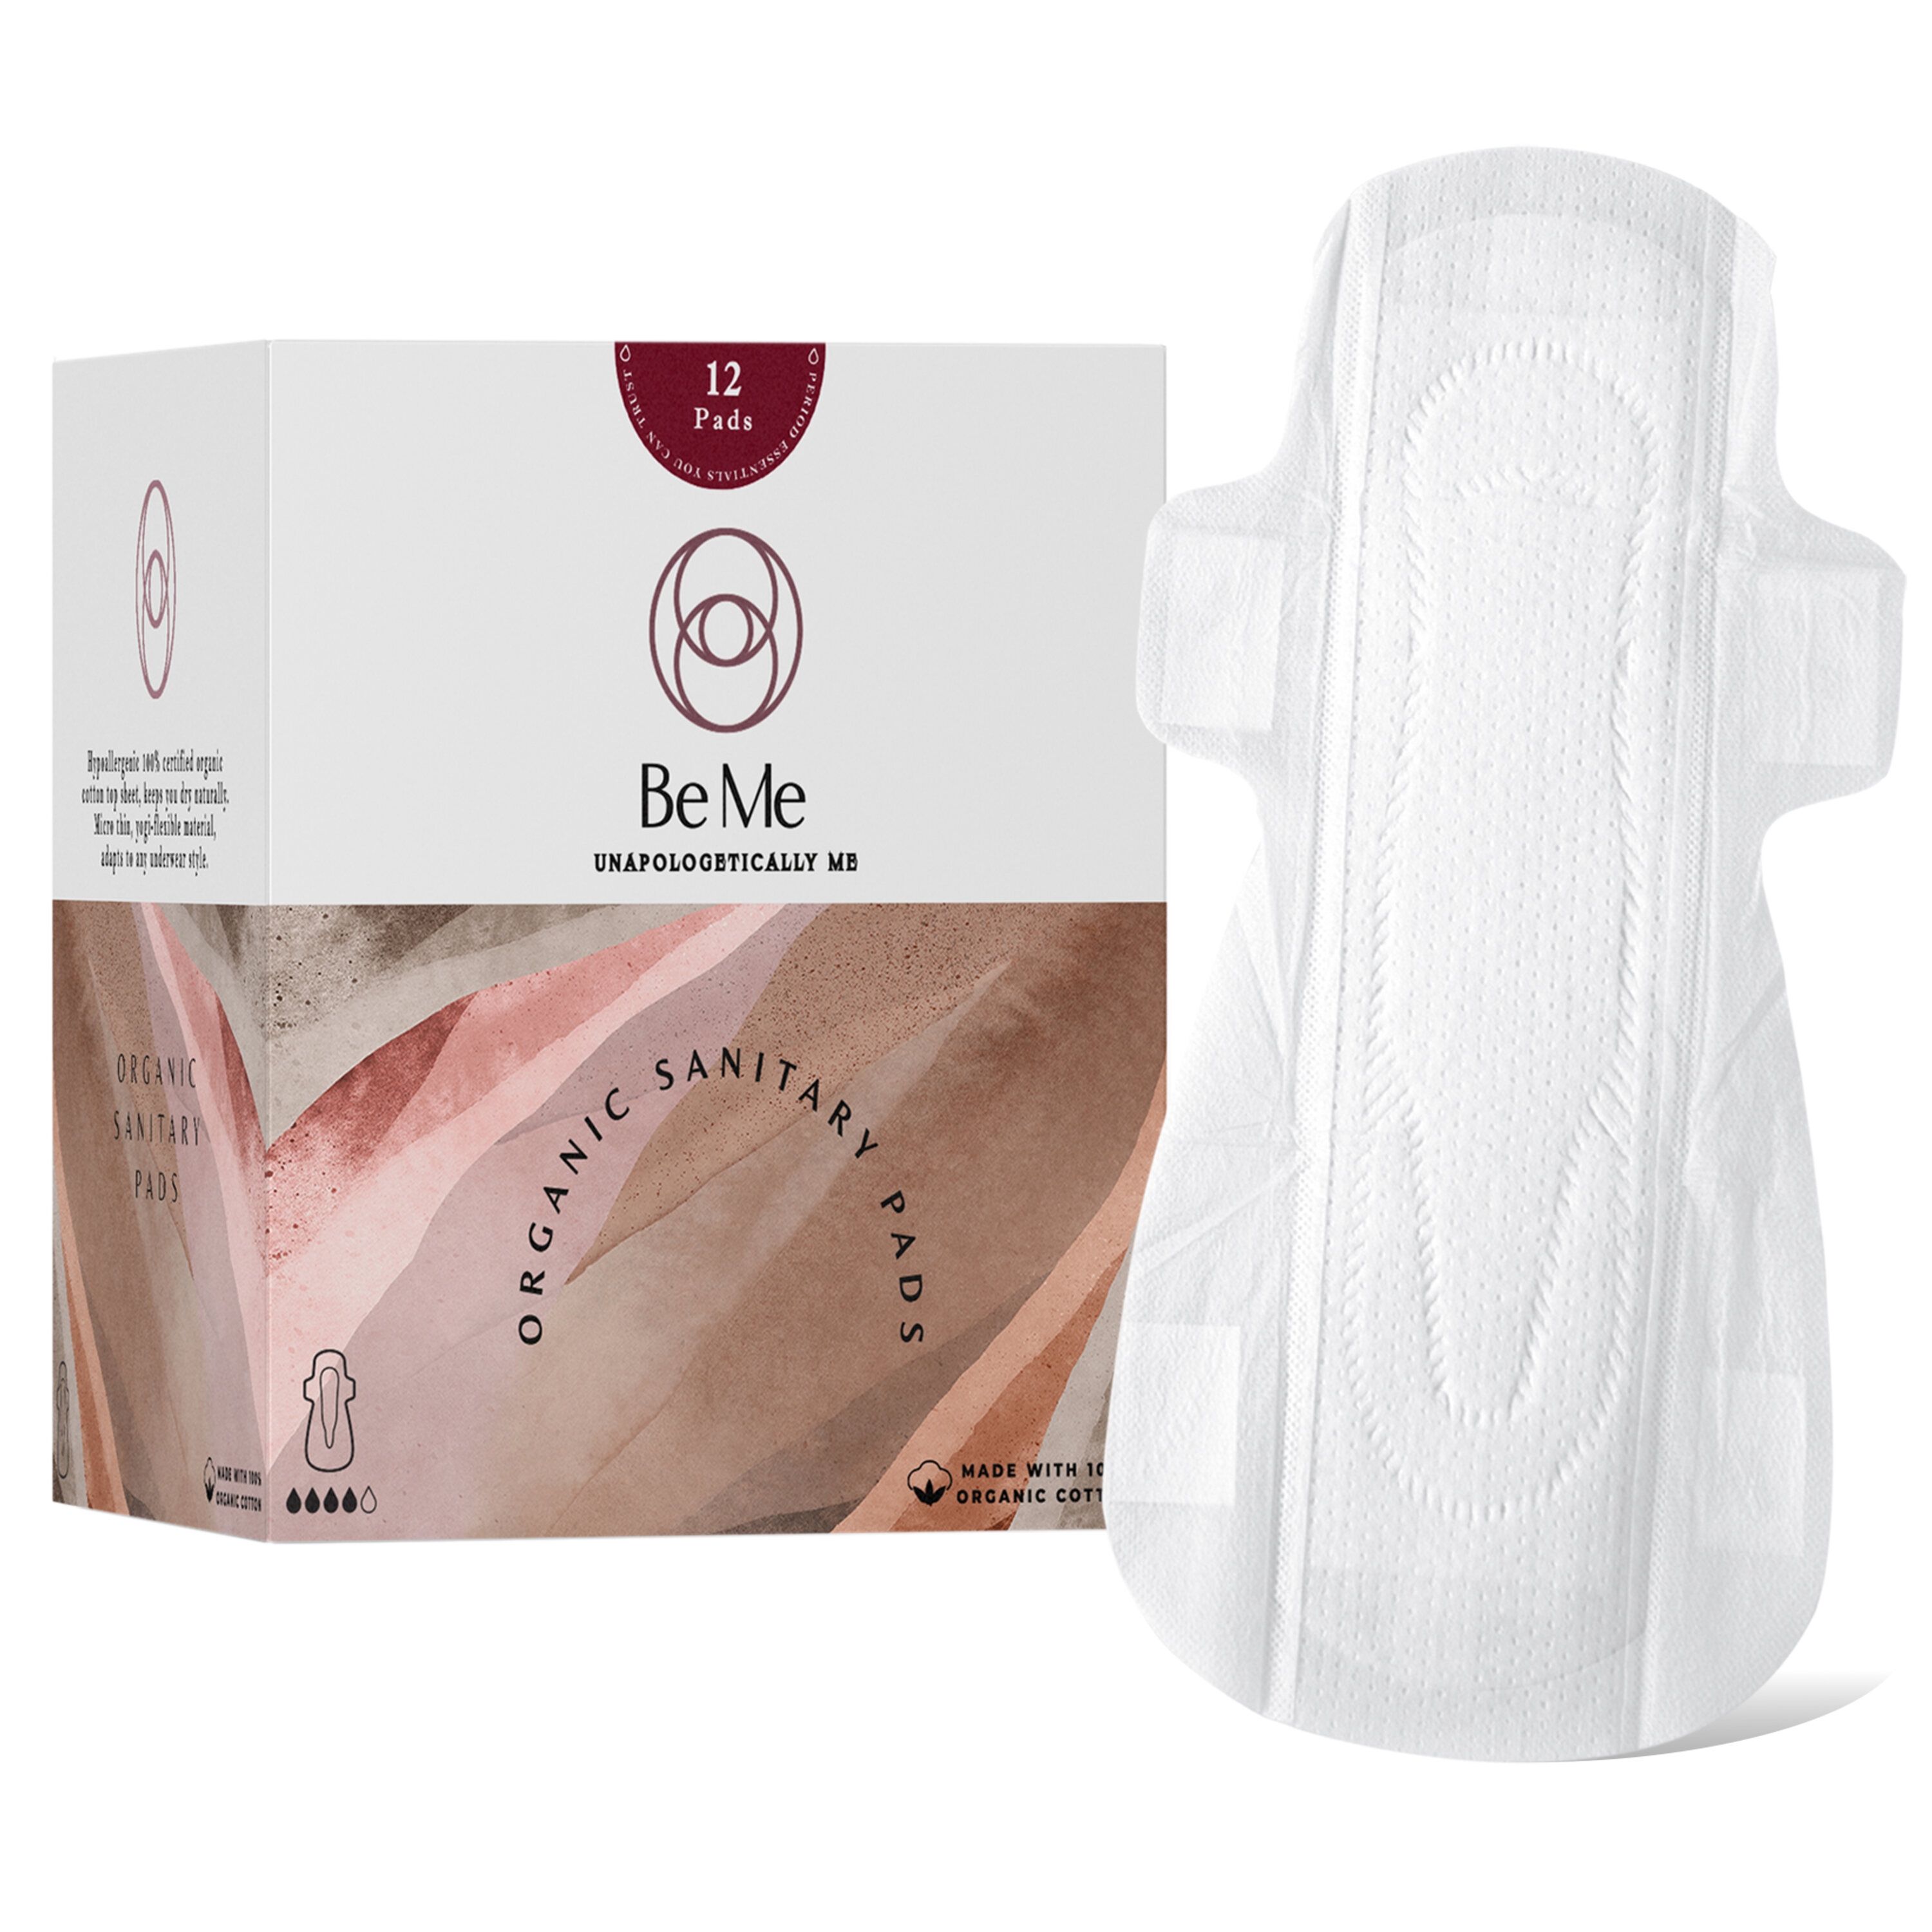 Be Me Sanitary Pads for Women, Regular- Pack of 12 Pads - With White Disposable Pouch